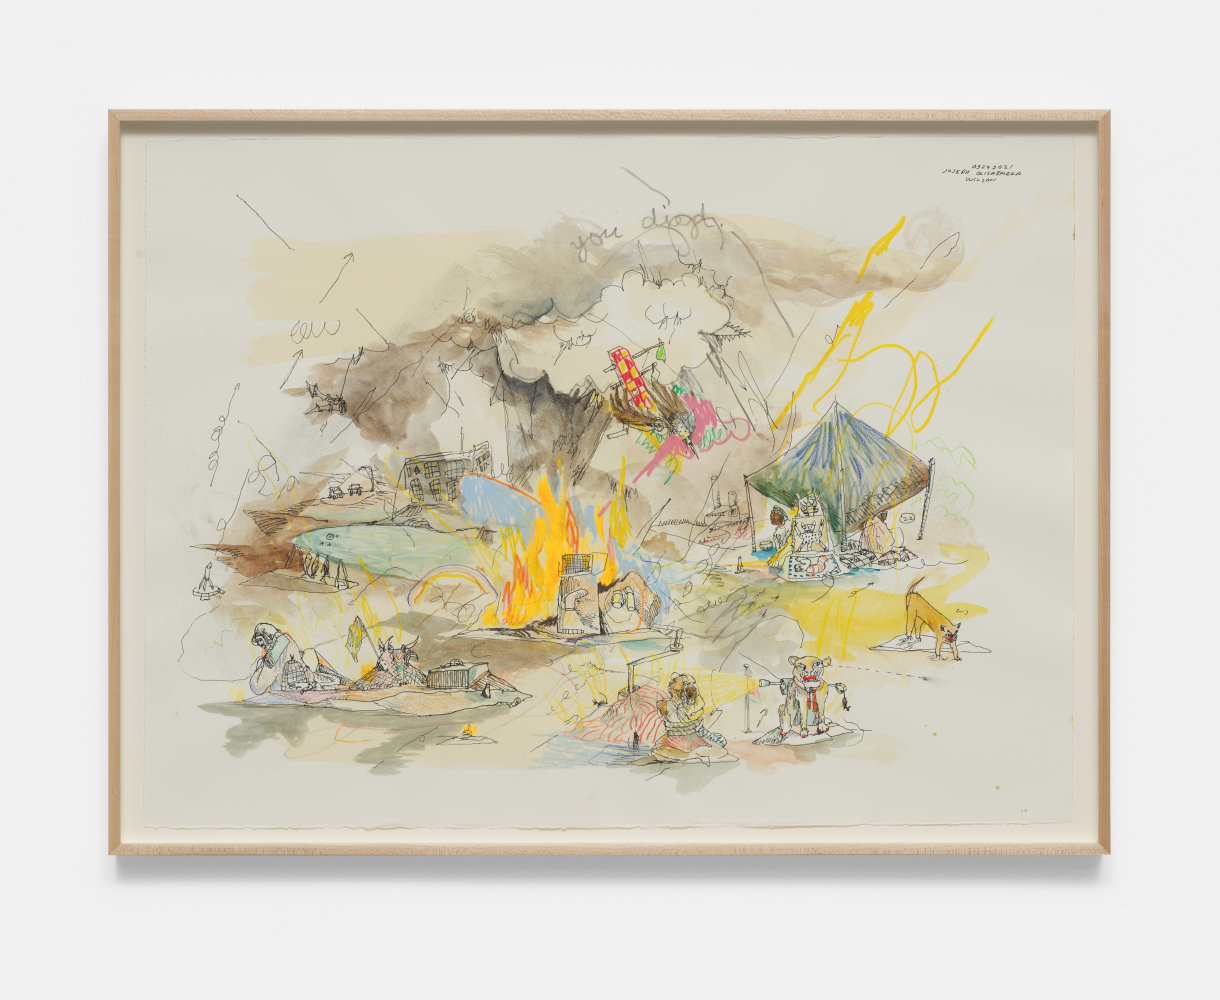 Joseph Olisaemeka Wilson
Fires in our camp, 2021
Pen, watercolor, colored pencil, graphite on paper
22h x 30w in
55.88h x 76.20w cm